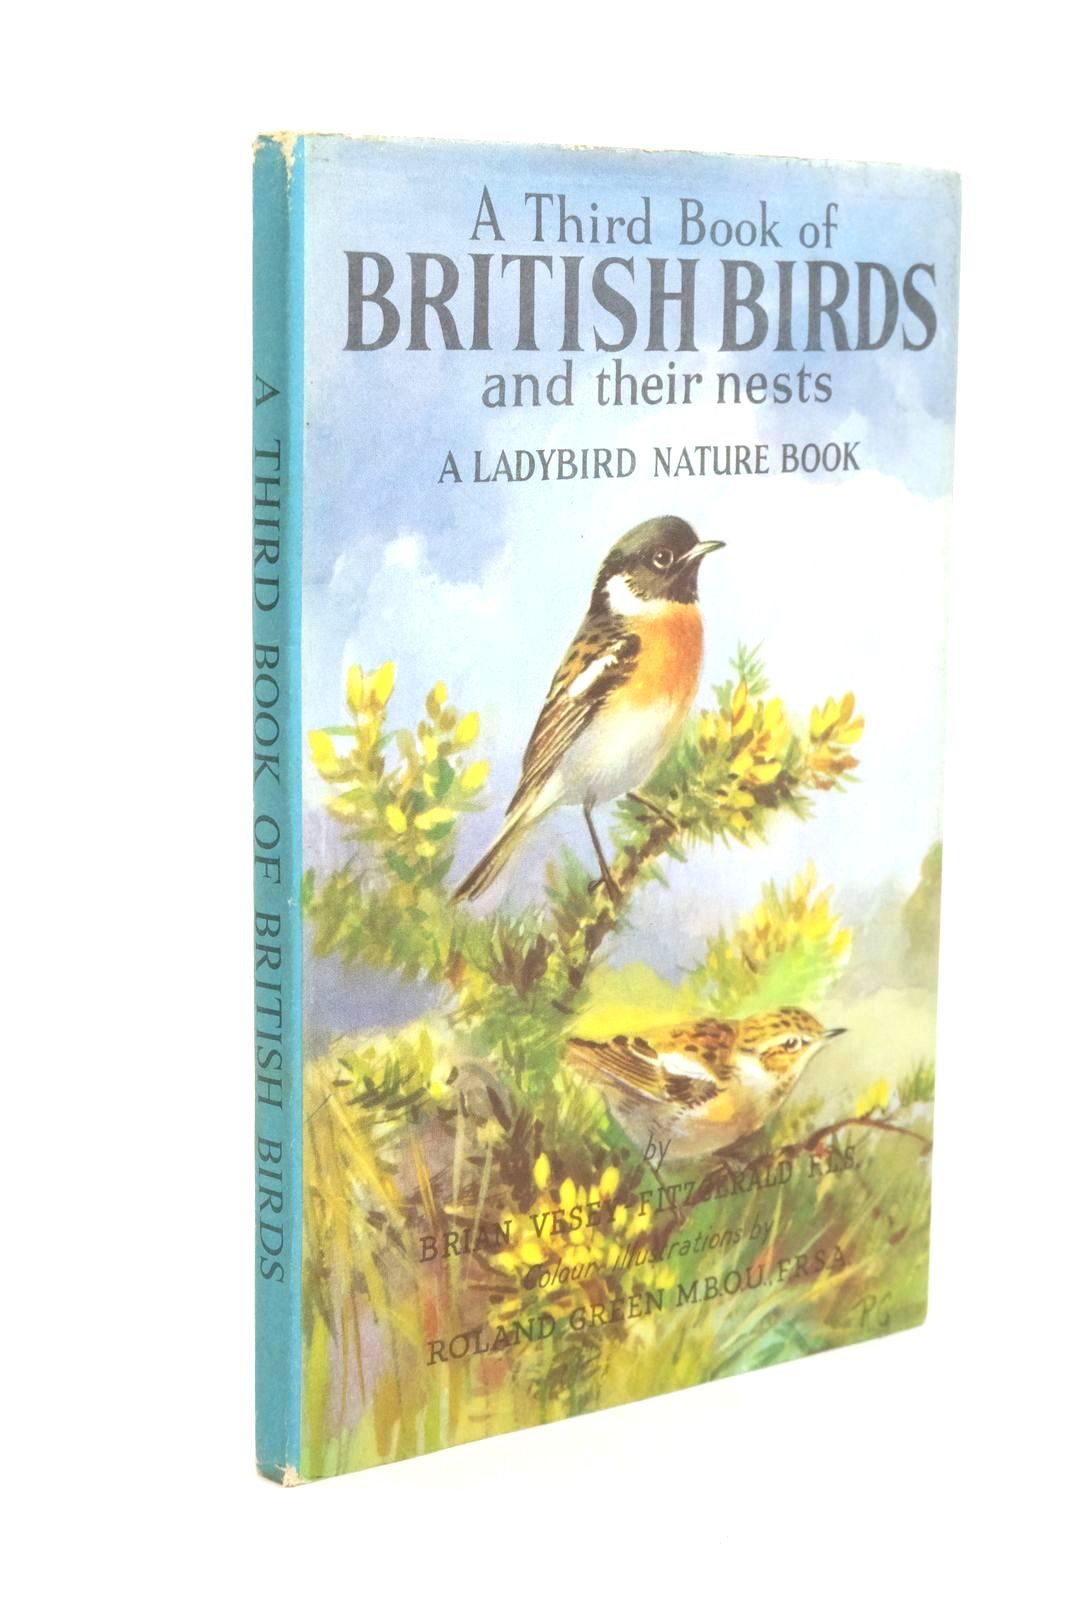 Photo of A THIRD BOOK OF BRITISH BIRDS AND THEIR NESTS written by Vesey-Fitzgerald, Brian illustrated by Green, Roland published by Wills & Hepworth Ltd. (STOCK CODE: 1322143)  for sale by Stella & Rose's Books